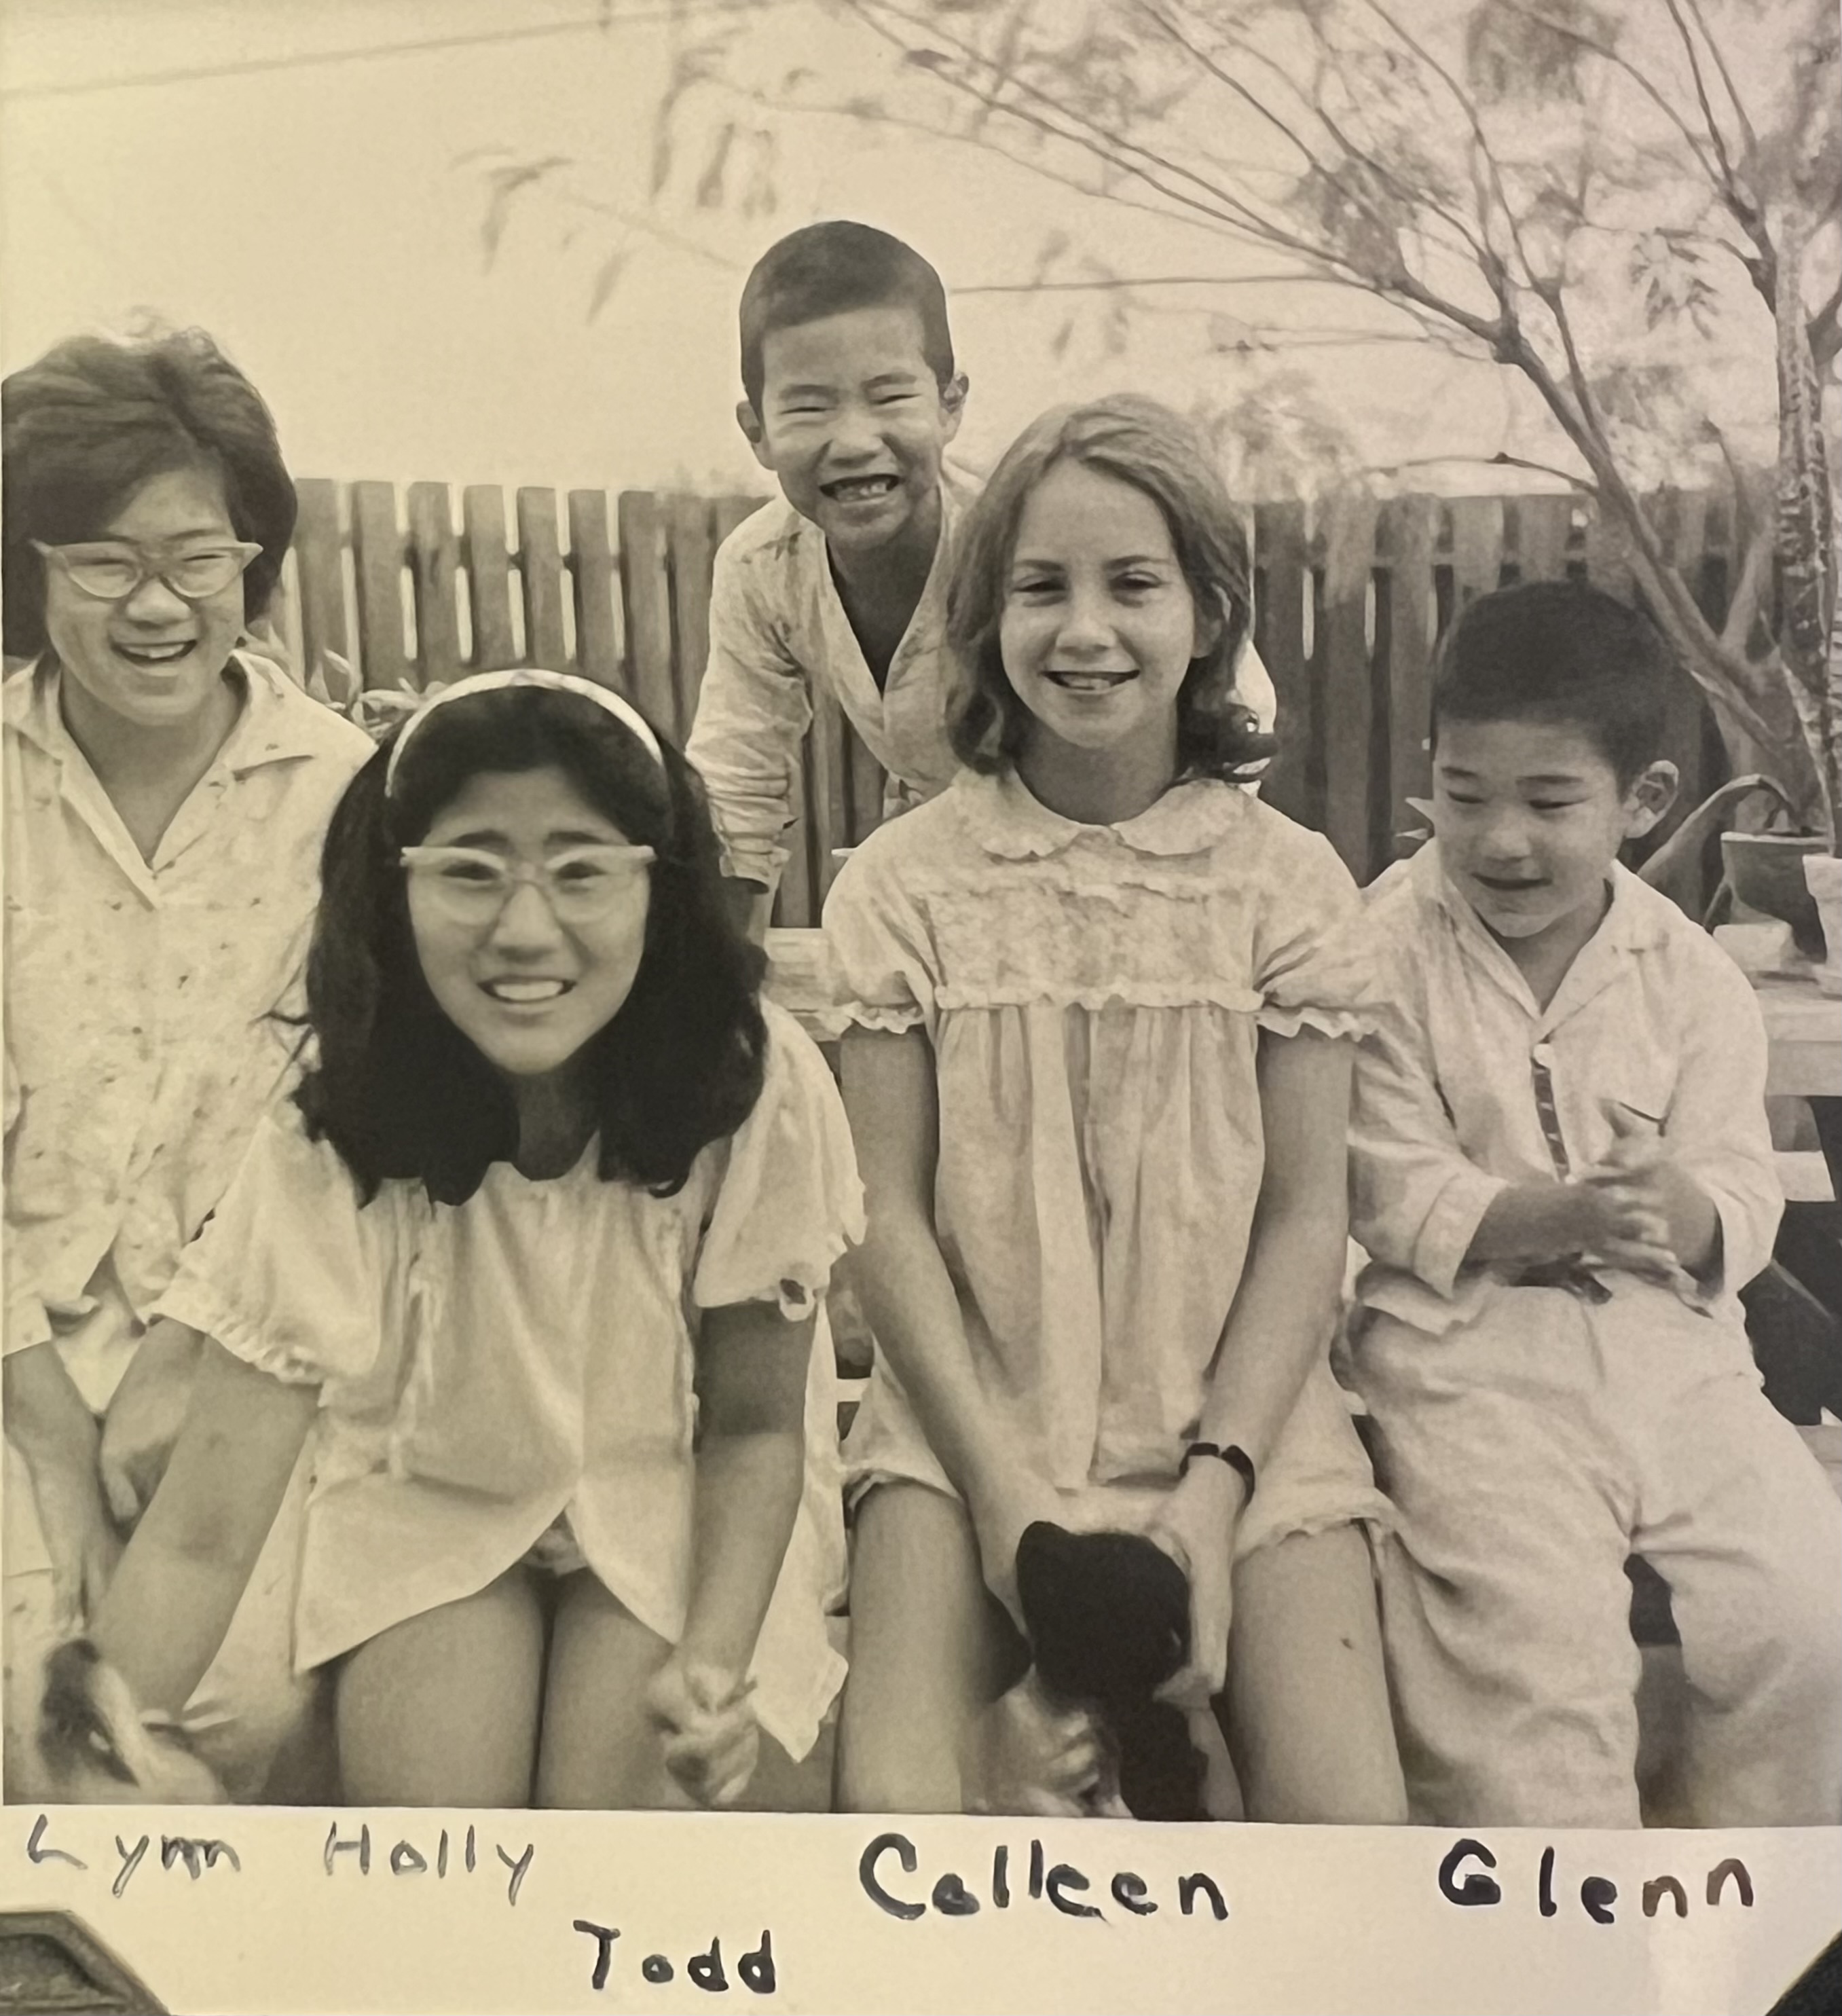 A group of smiling children sitting at an outdoor table, wearing 1960s pajamas. The text reads 'Lynn, Holly, Todd, Colleen, Glenn'.